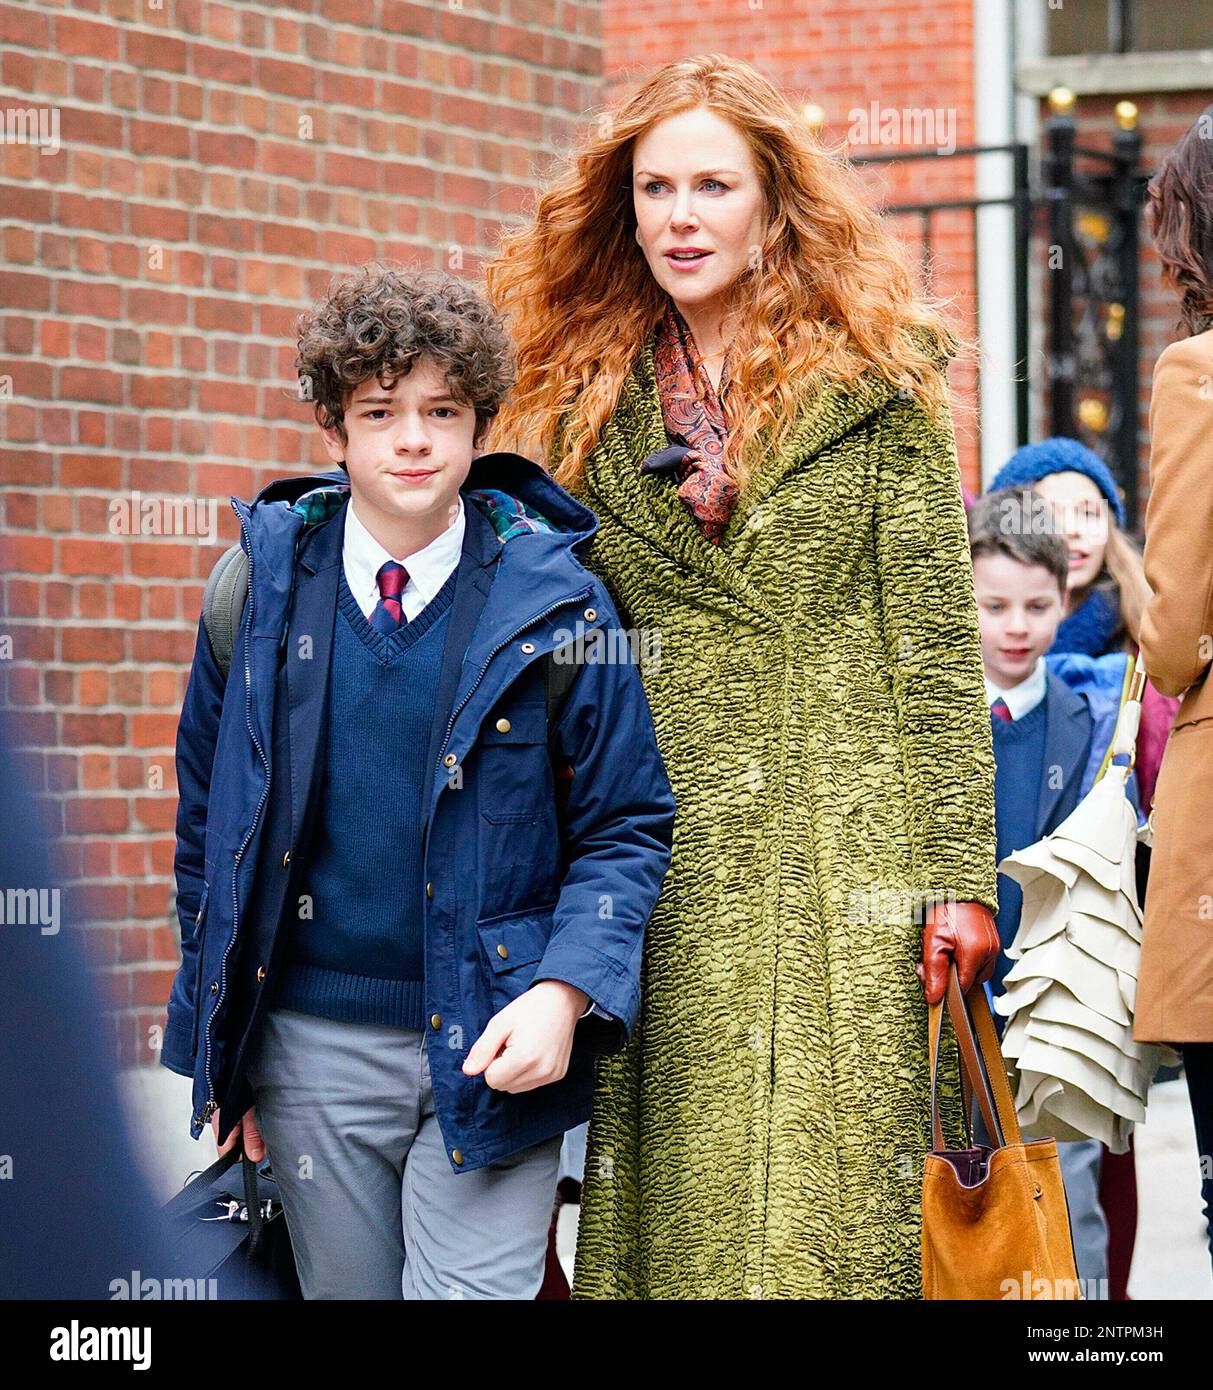 Photo by XPX/STAR MAX/IPx 2019 3/18/19 Nicole Kidman on the set of The Undoing in New York City Stock Photo